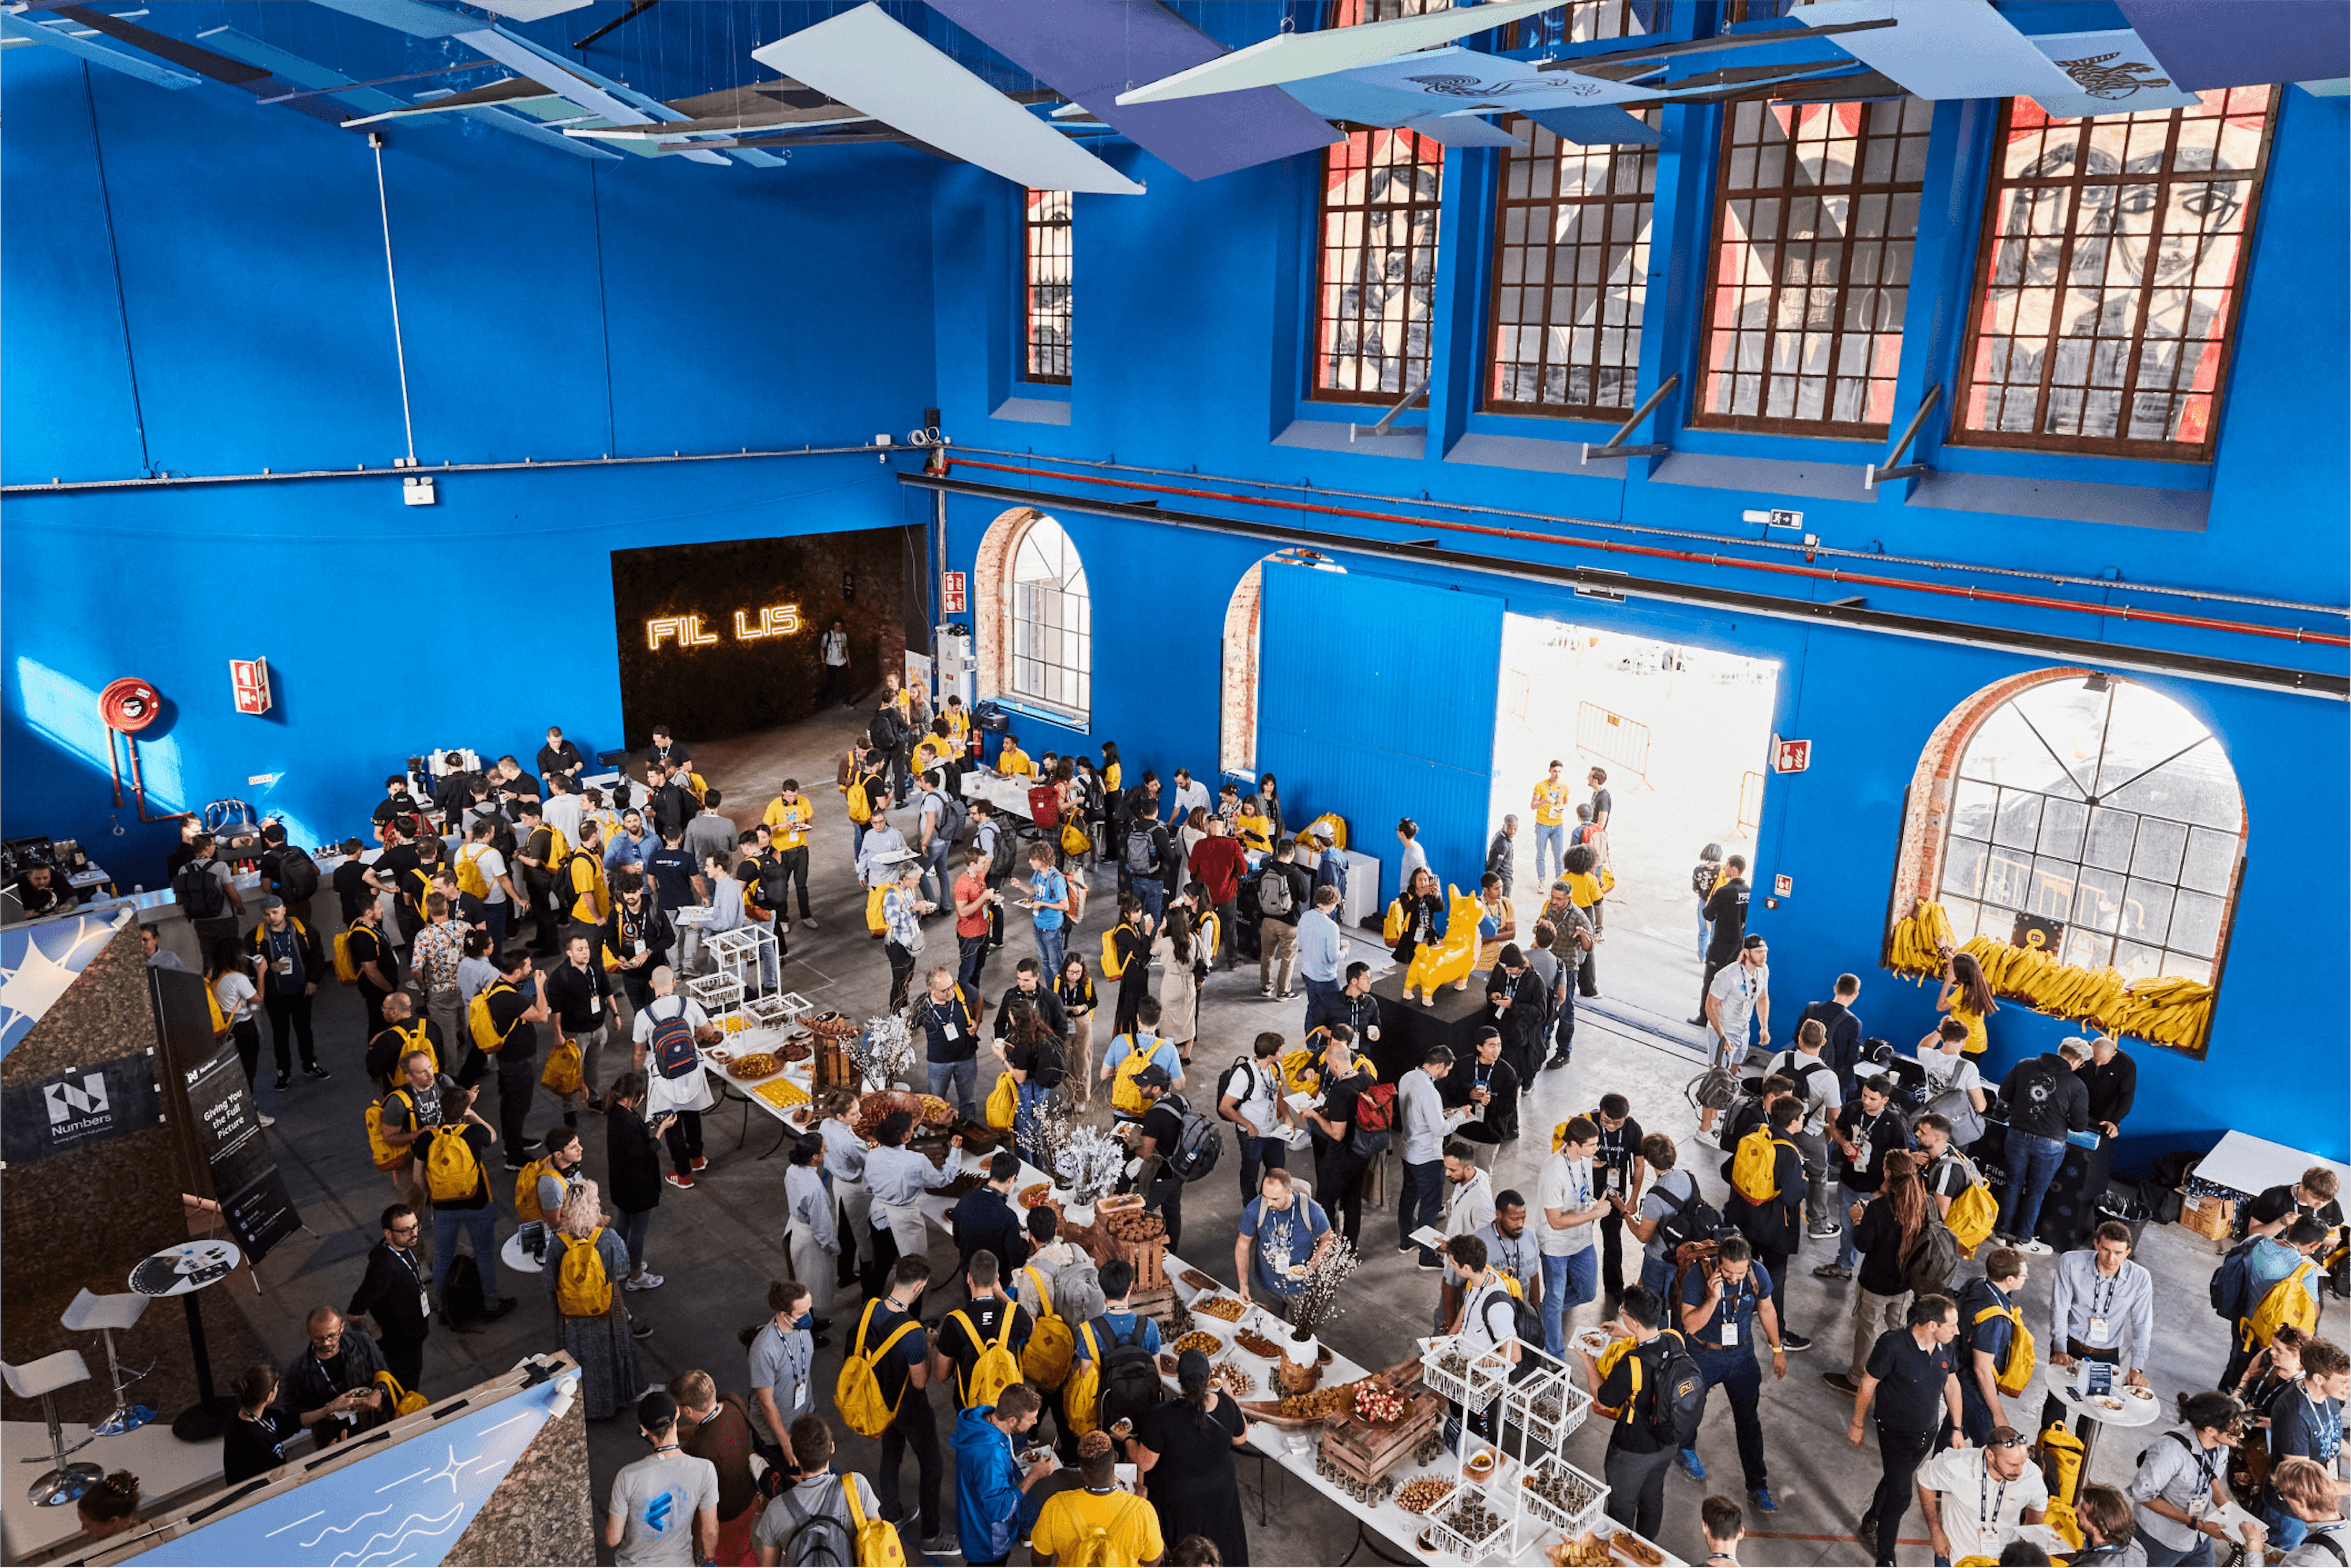 Large event space with people gathered around tables for networking, many wearing yellow backpacks, against a bright blue backdrop.